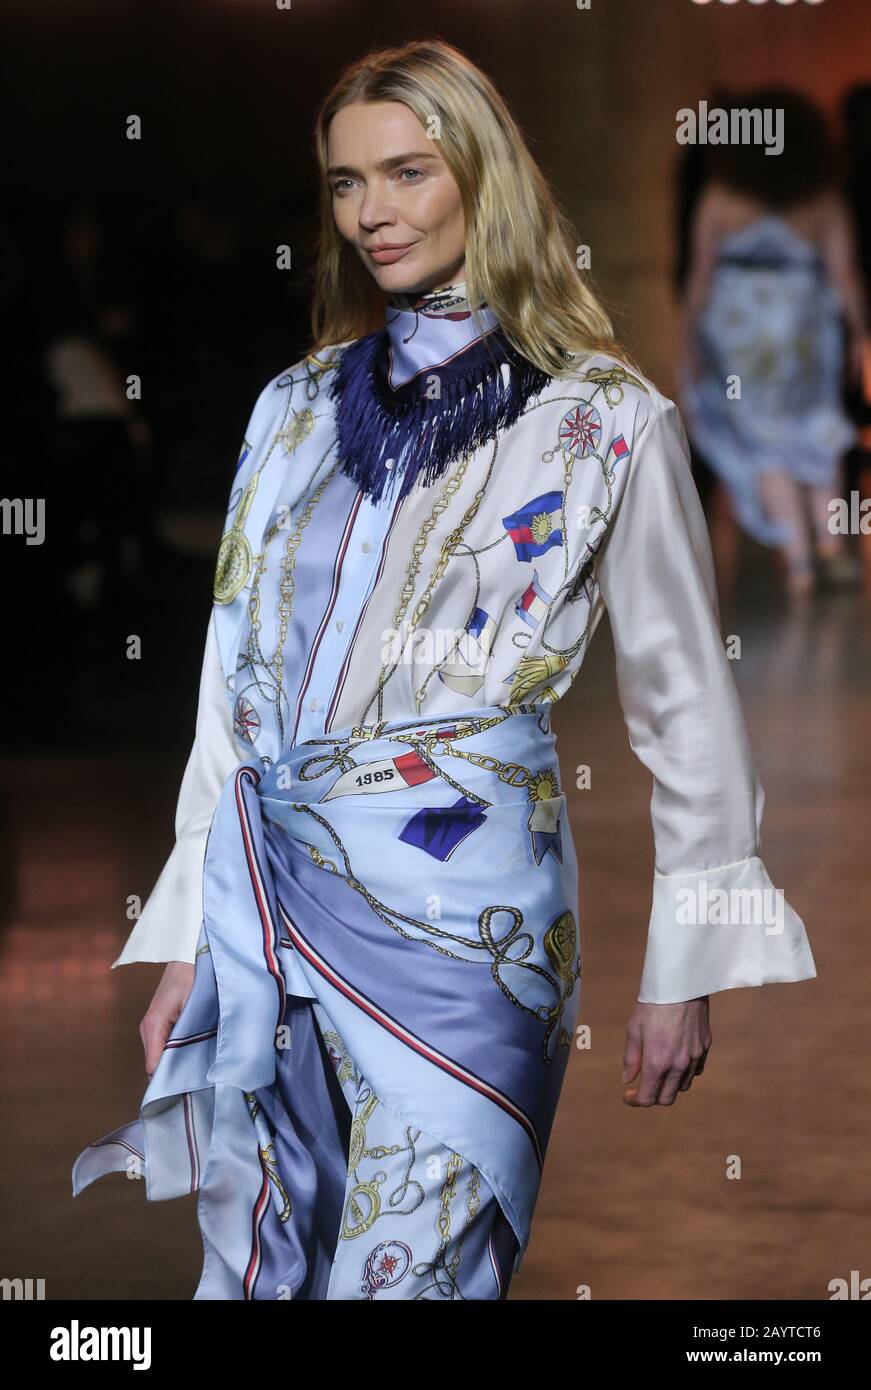 Jodie Kidd on the catwalk during the Tommy Hilfiger show at the London Fashion Week February 2020 show at Tate Modern in London. Stock Photo